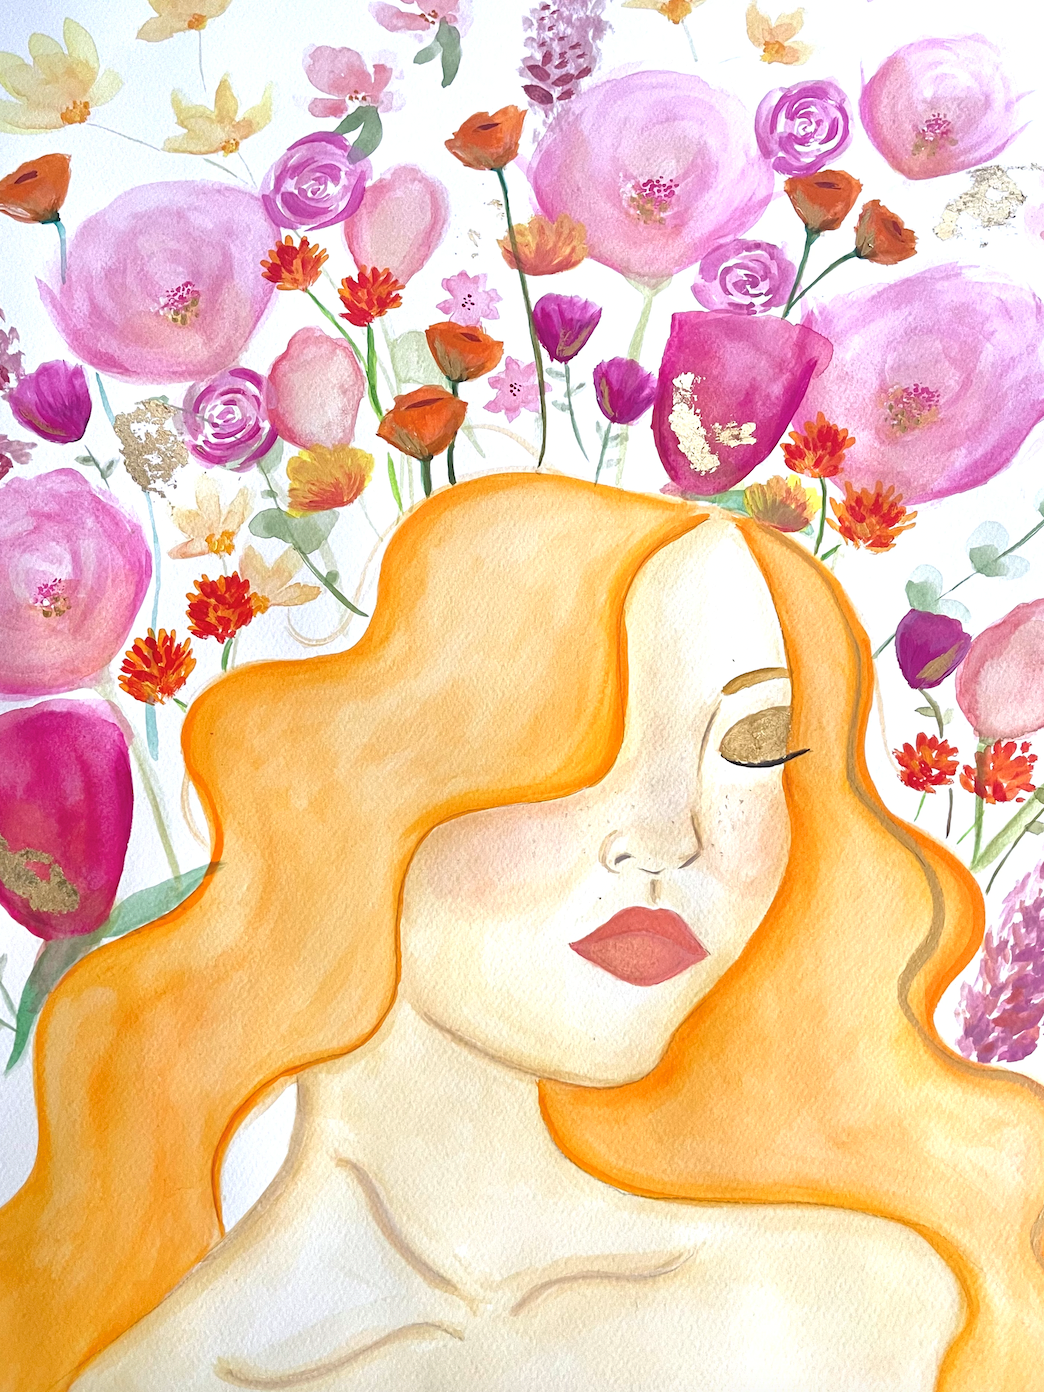 A watercolor portrait of a woman with flowing auburn hair and closed eyes, exuding tranquility against a backdrop of lush pink and red flowers.